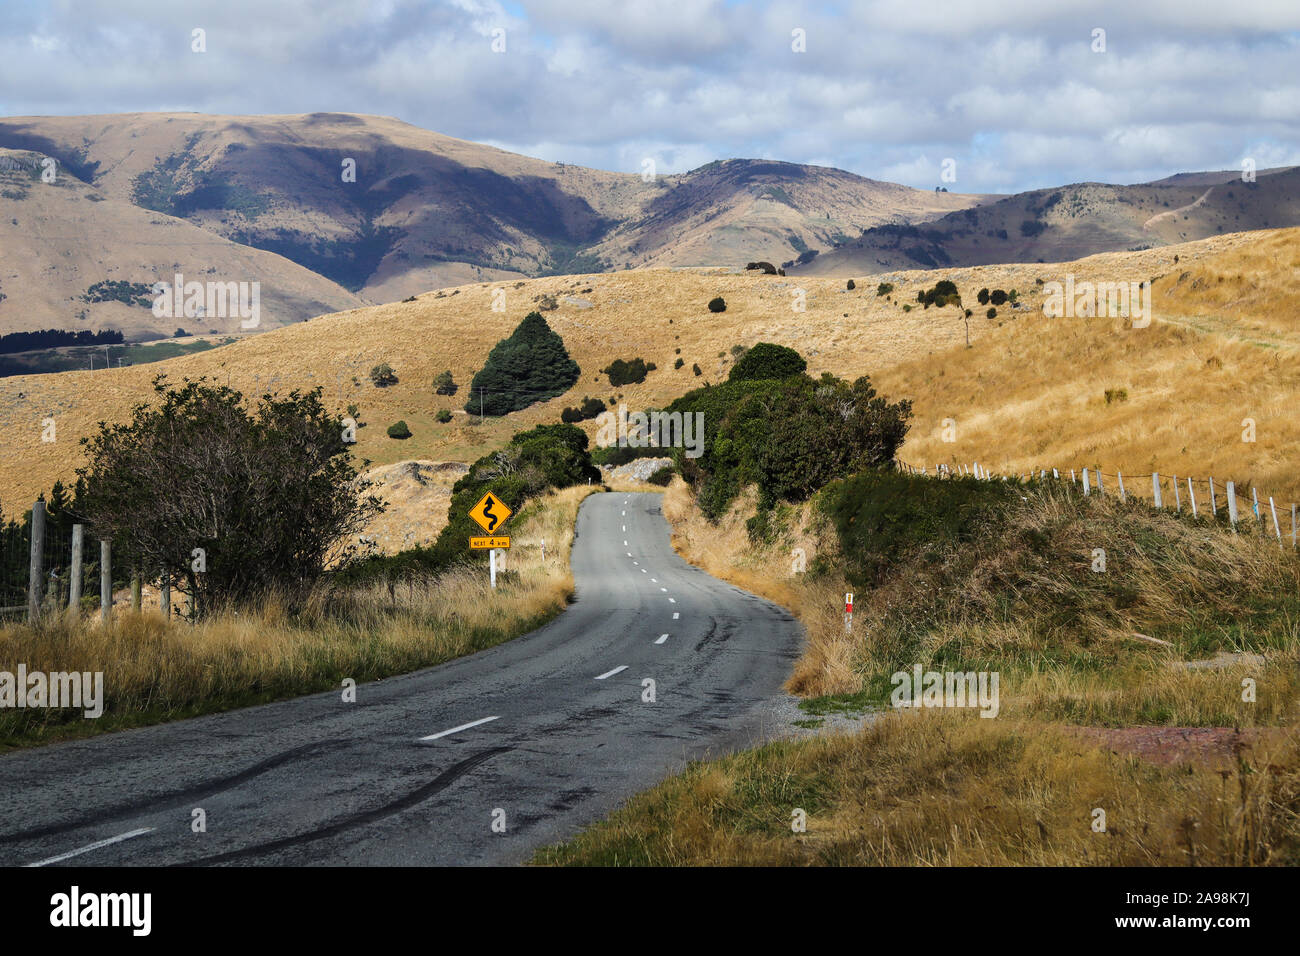 Hilly and curvy road on top of a mountain Stock Photo